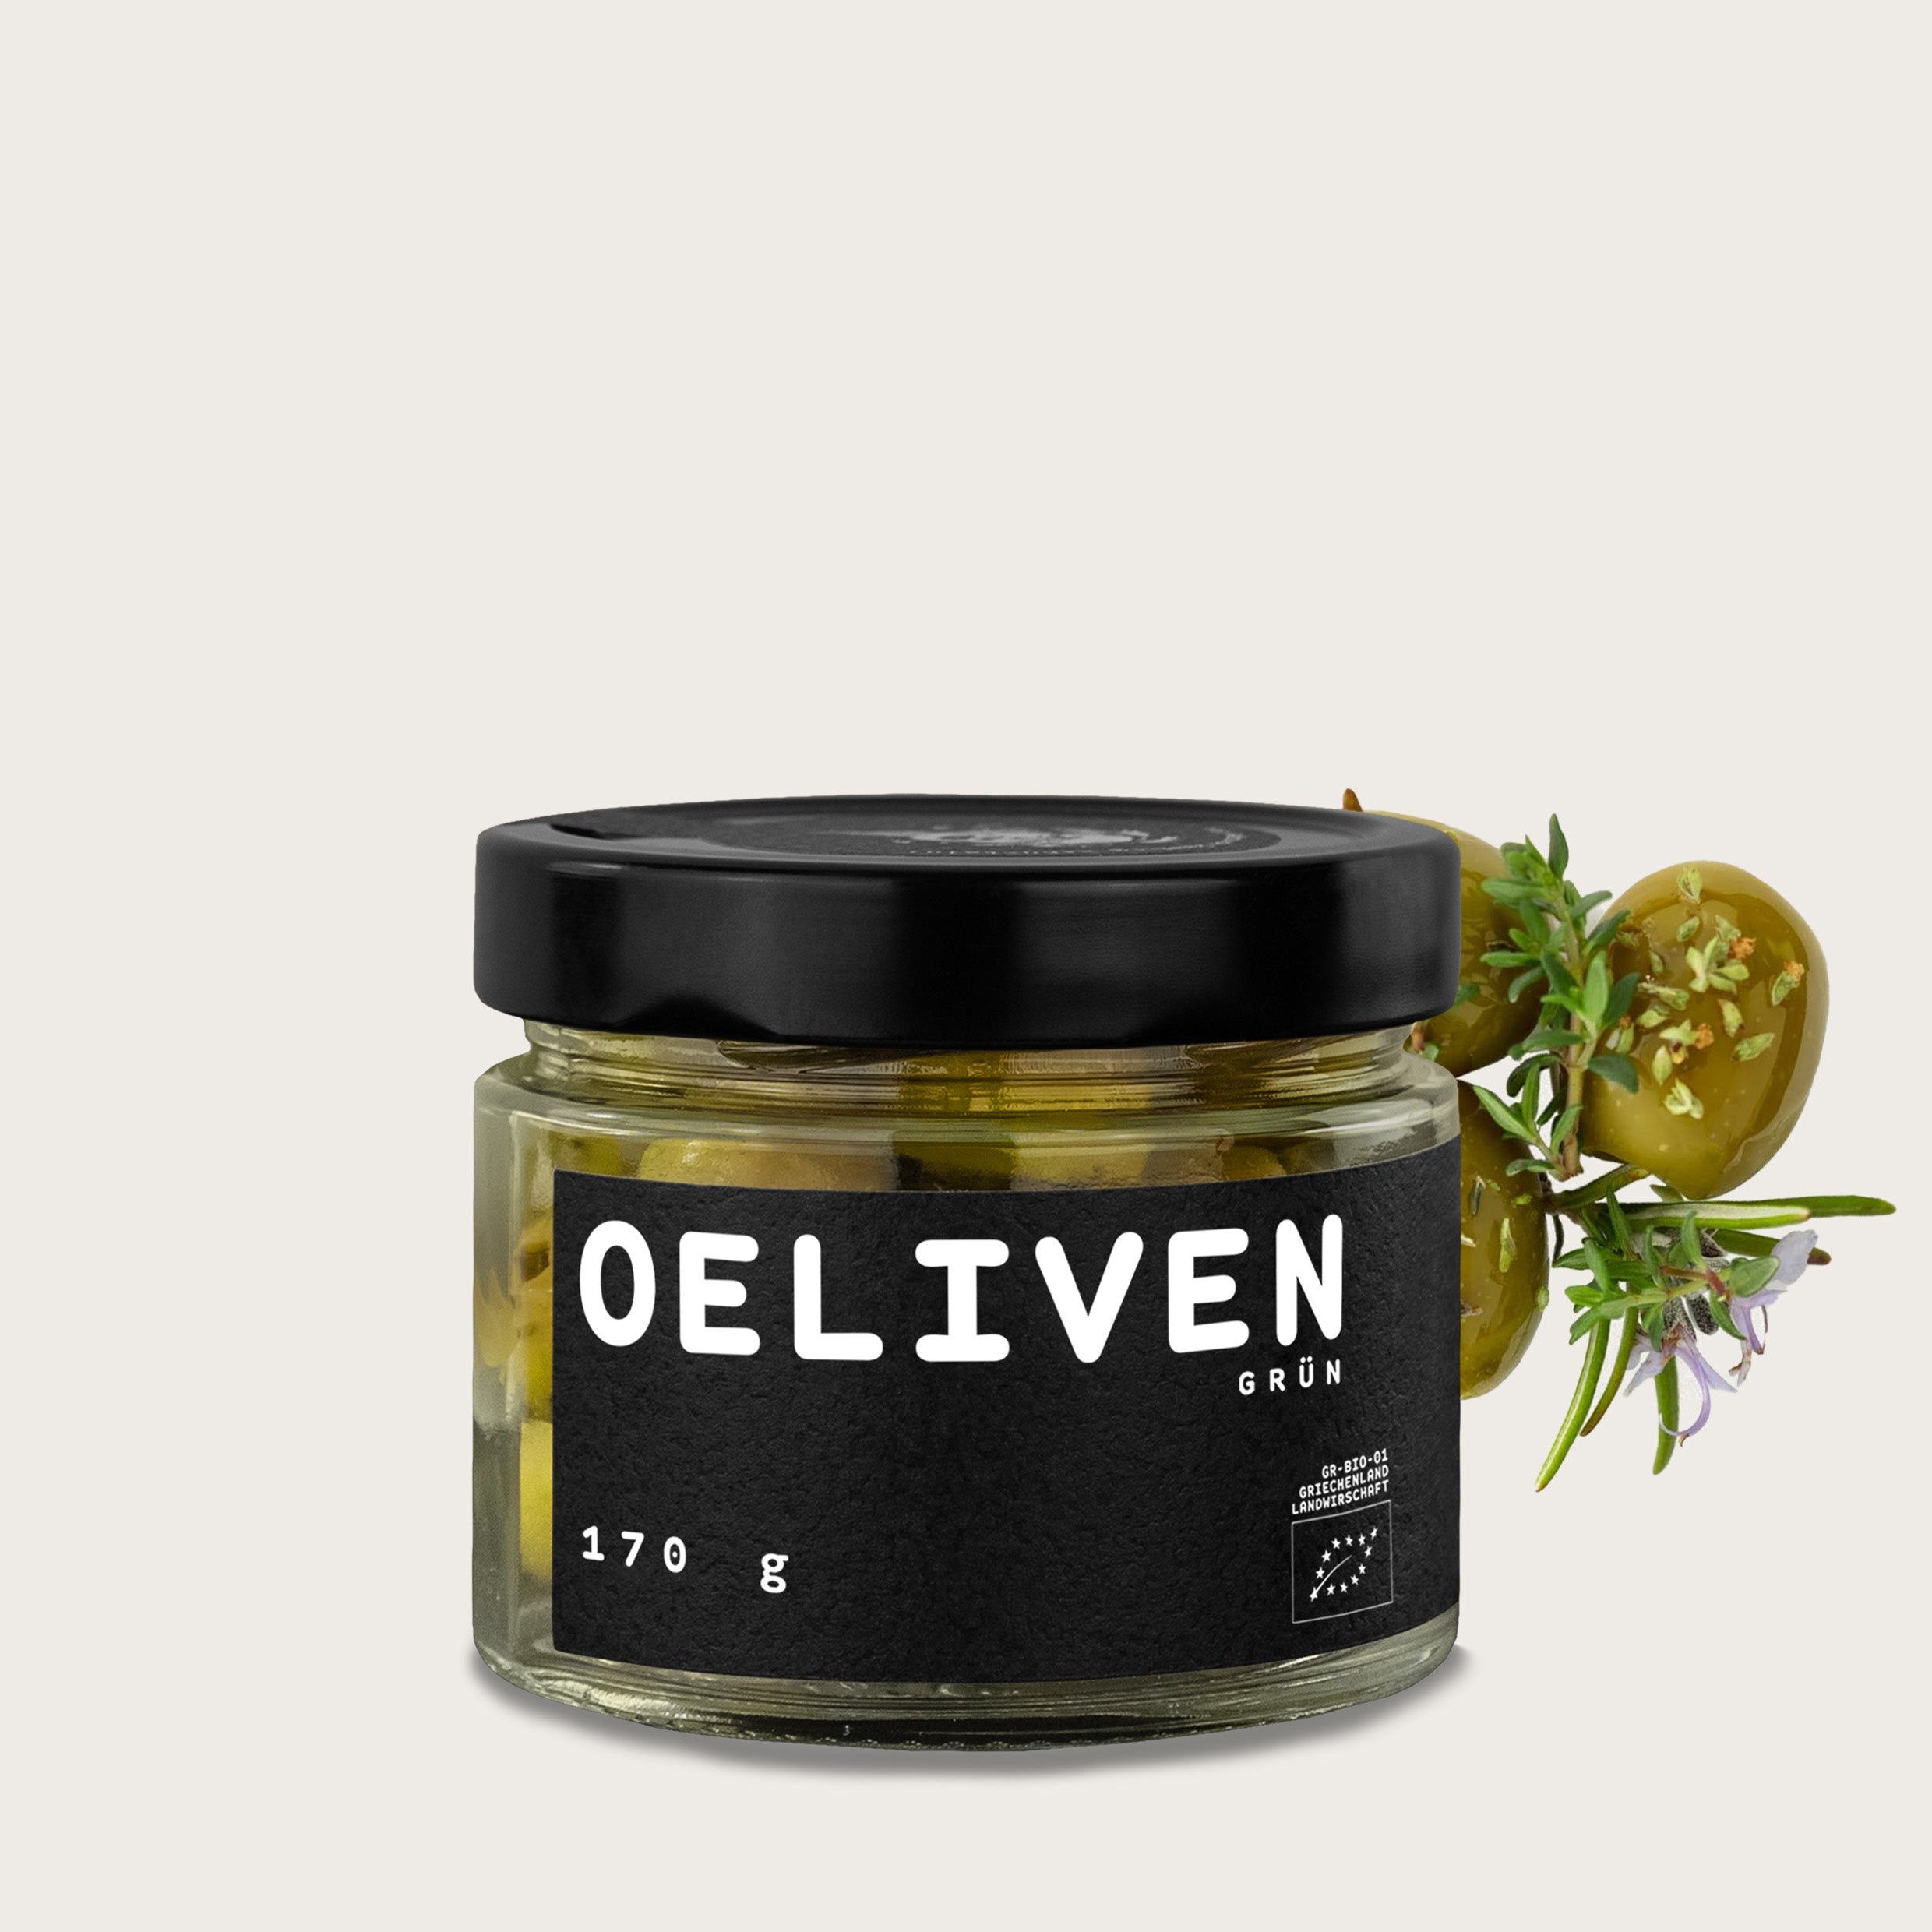 OELiven Green 170 g - Green organic olives with herbs